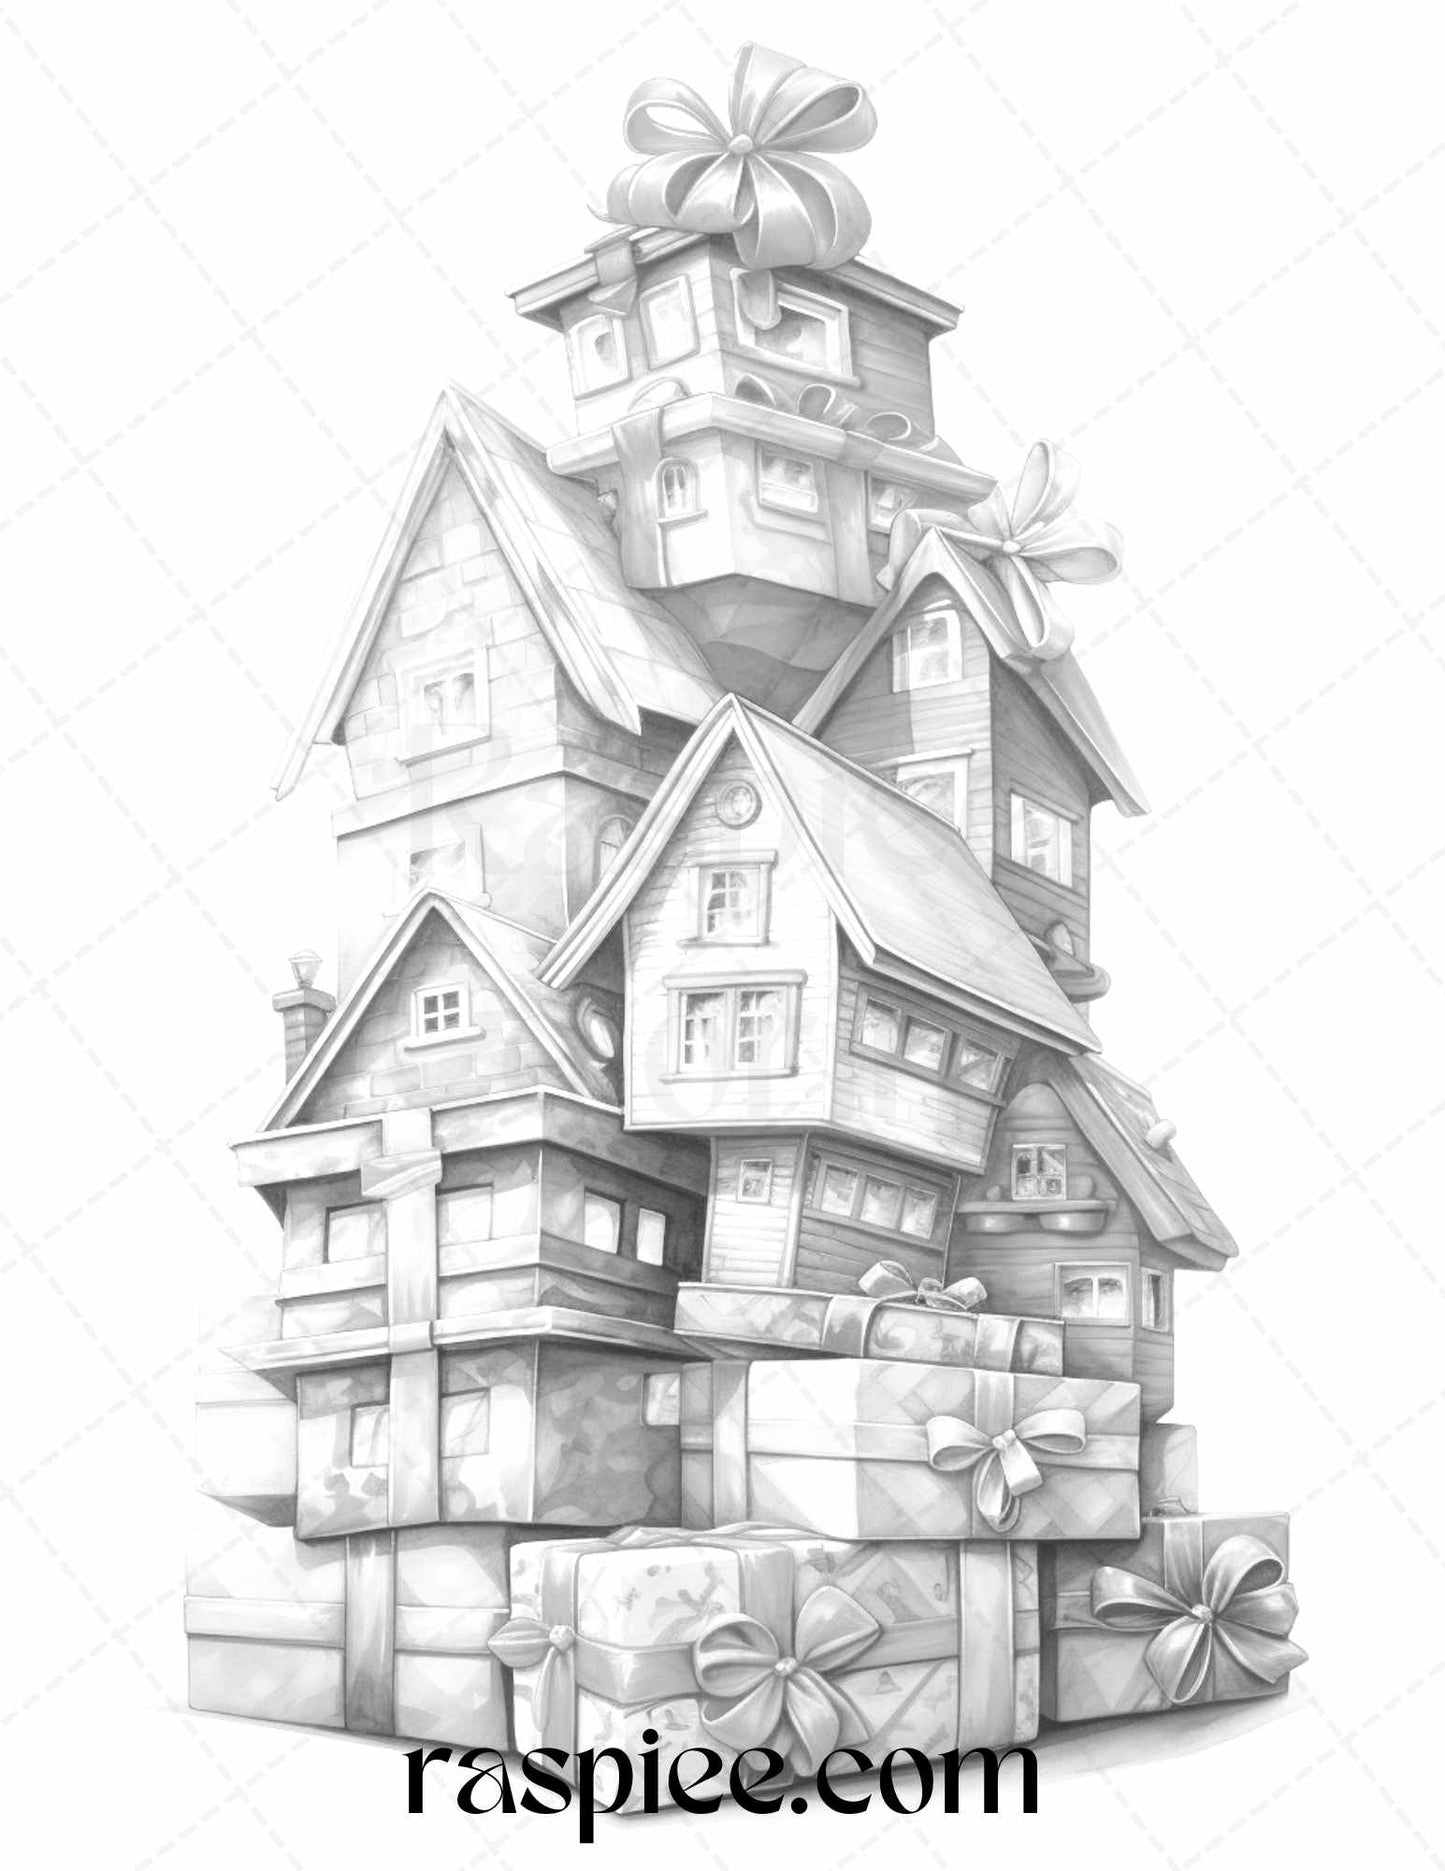 Grayscale Coloring Pages for Adults and Kids, Printable Gift Box Houses Coloring Sheets, Cute Coloring Pages for Adults and Children, DIY Gift Box Coloring for All Ages, Fun and Relaxing Coloring Activities, Creative Art Therapy for Kids and Adults